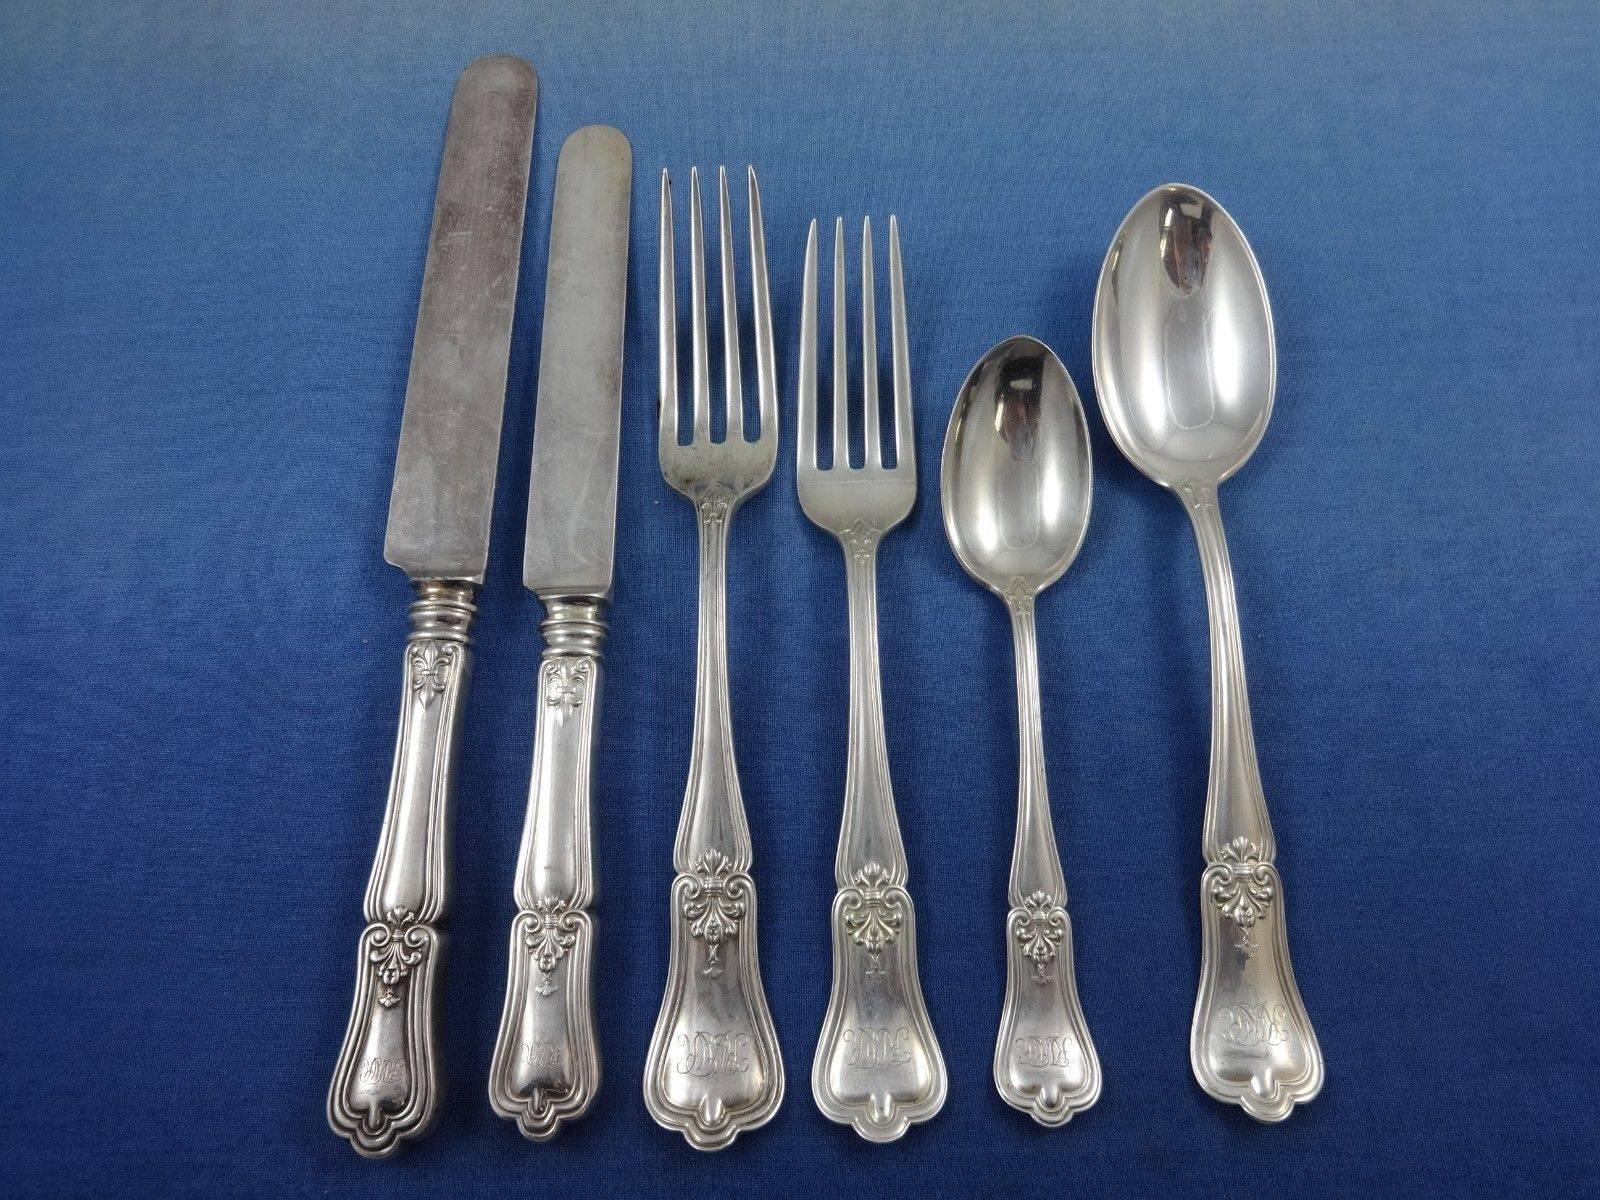 Rare Imperial by Gorham sterling silver flatware set of 80 pieces in original fitted vintage chest. This set includes:

12 dinner size knives with blunt silverplated blades, 9 1/2